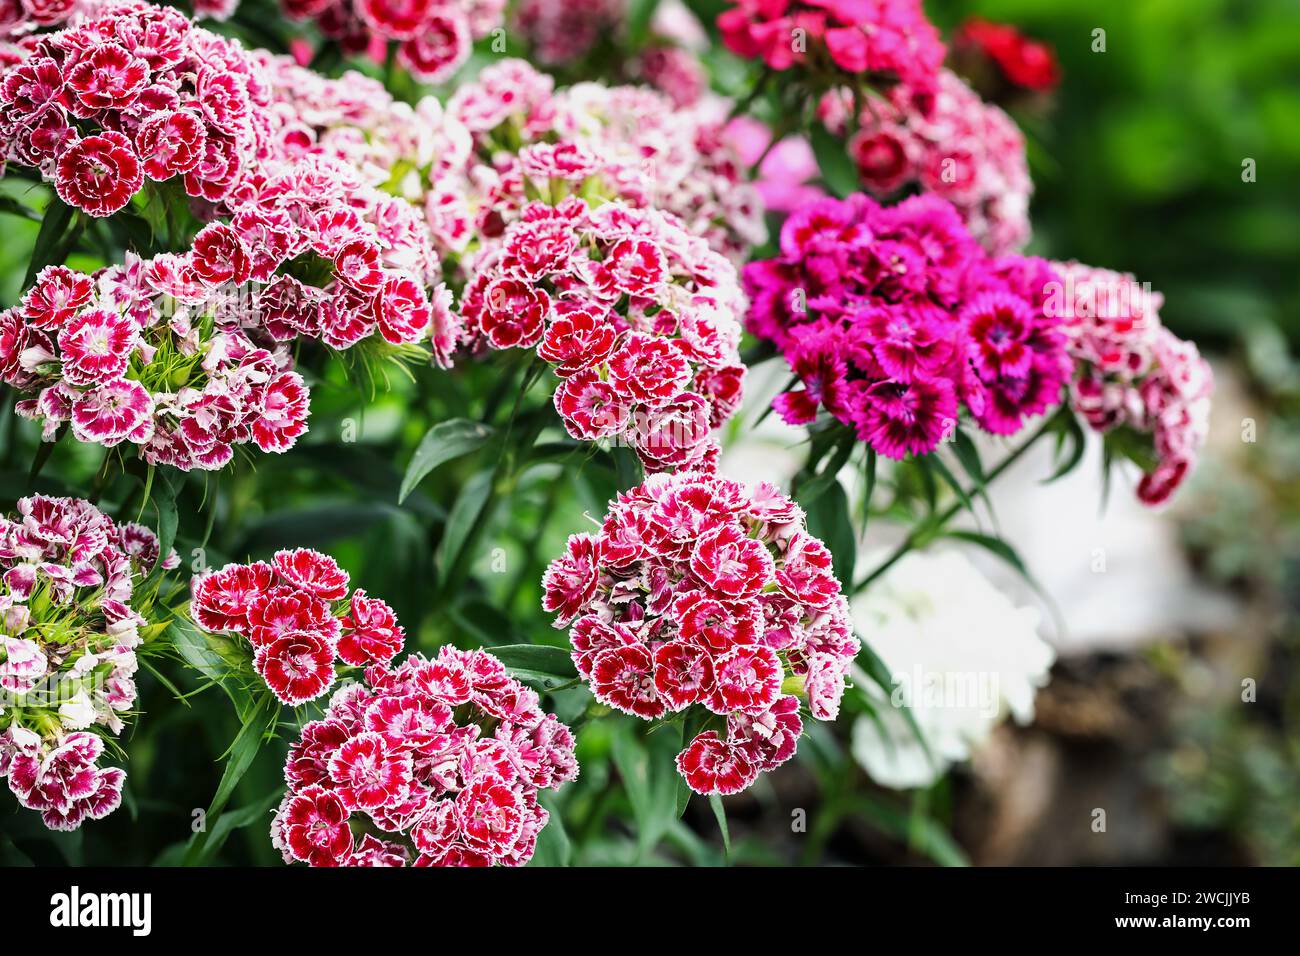 Closeup of multicolored Sweet William, Dianthus barbatus, flowers blooming outdoors. Selective focus on flowers in lower front with blurred background. Stock Photo